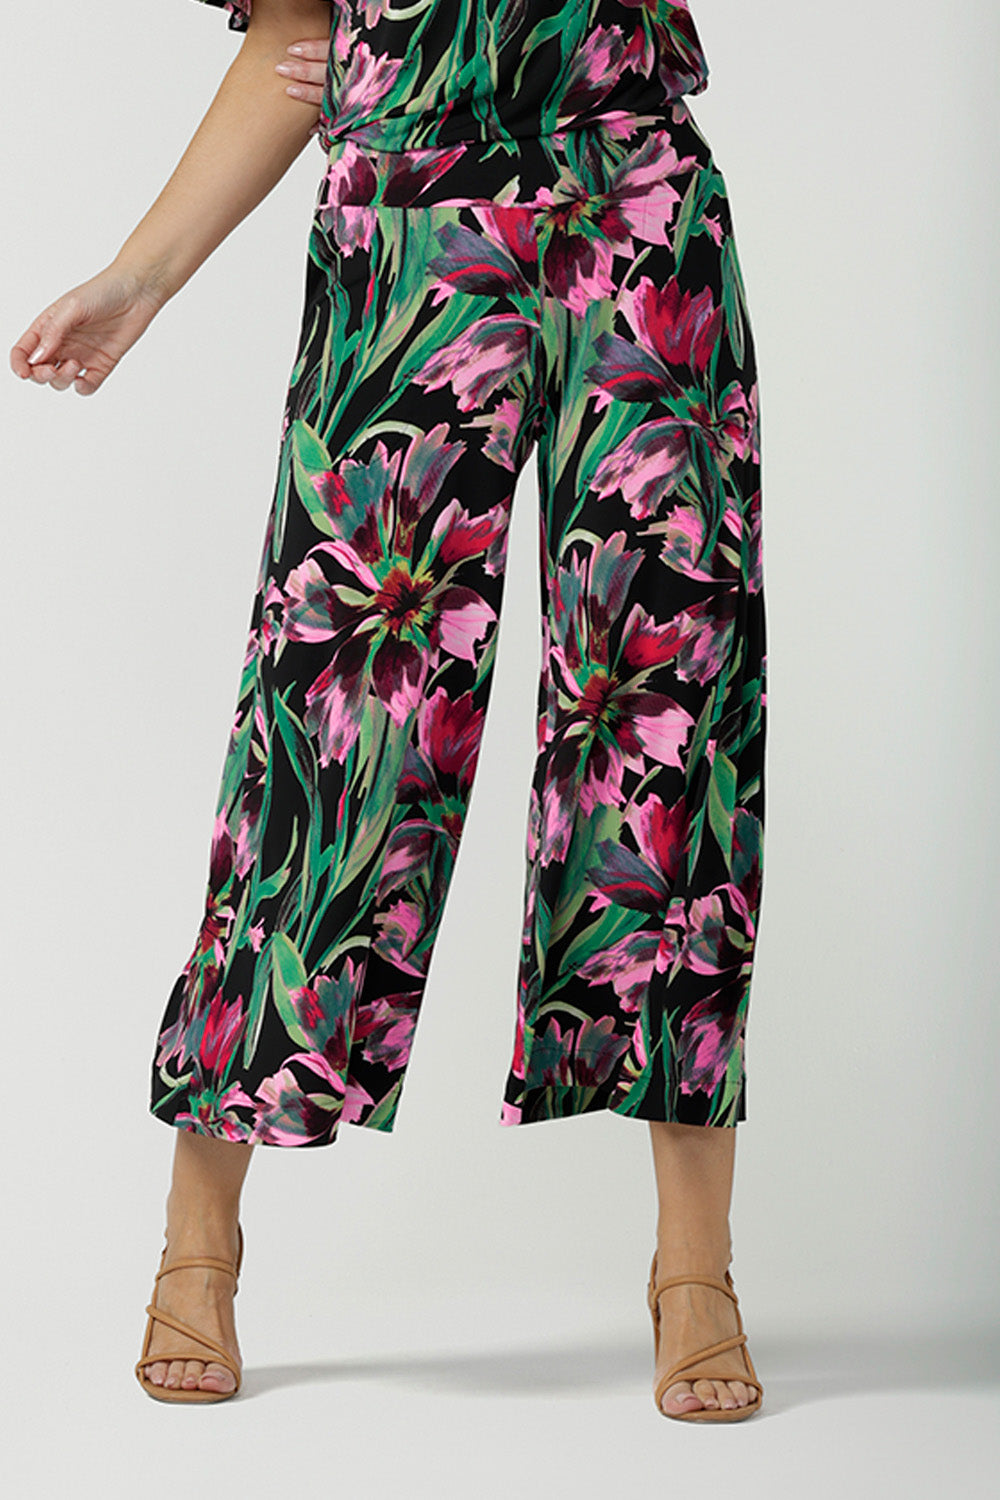 Crop in of a size 10, 40 plus woman wearing printed jersey, wide leg pants with matching floral print jersey top, for spring/summer 23. Pull-on pants with a deep waistband, the cropped, culotte legs make great summer pants that work for petite heights as well as taller women. Shop pants online in sizes 8 to 24.